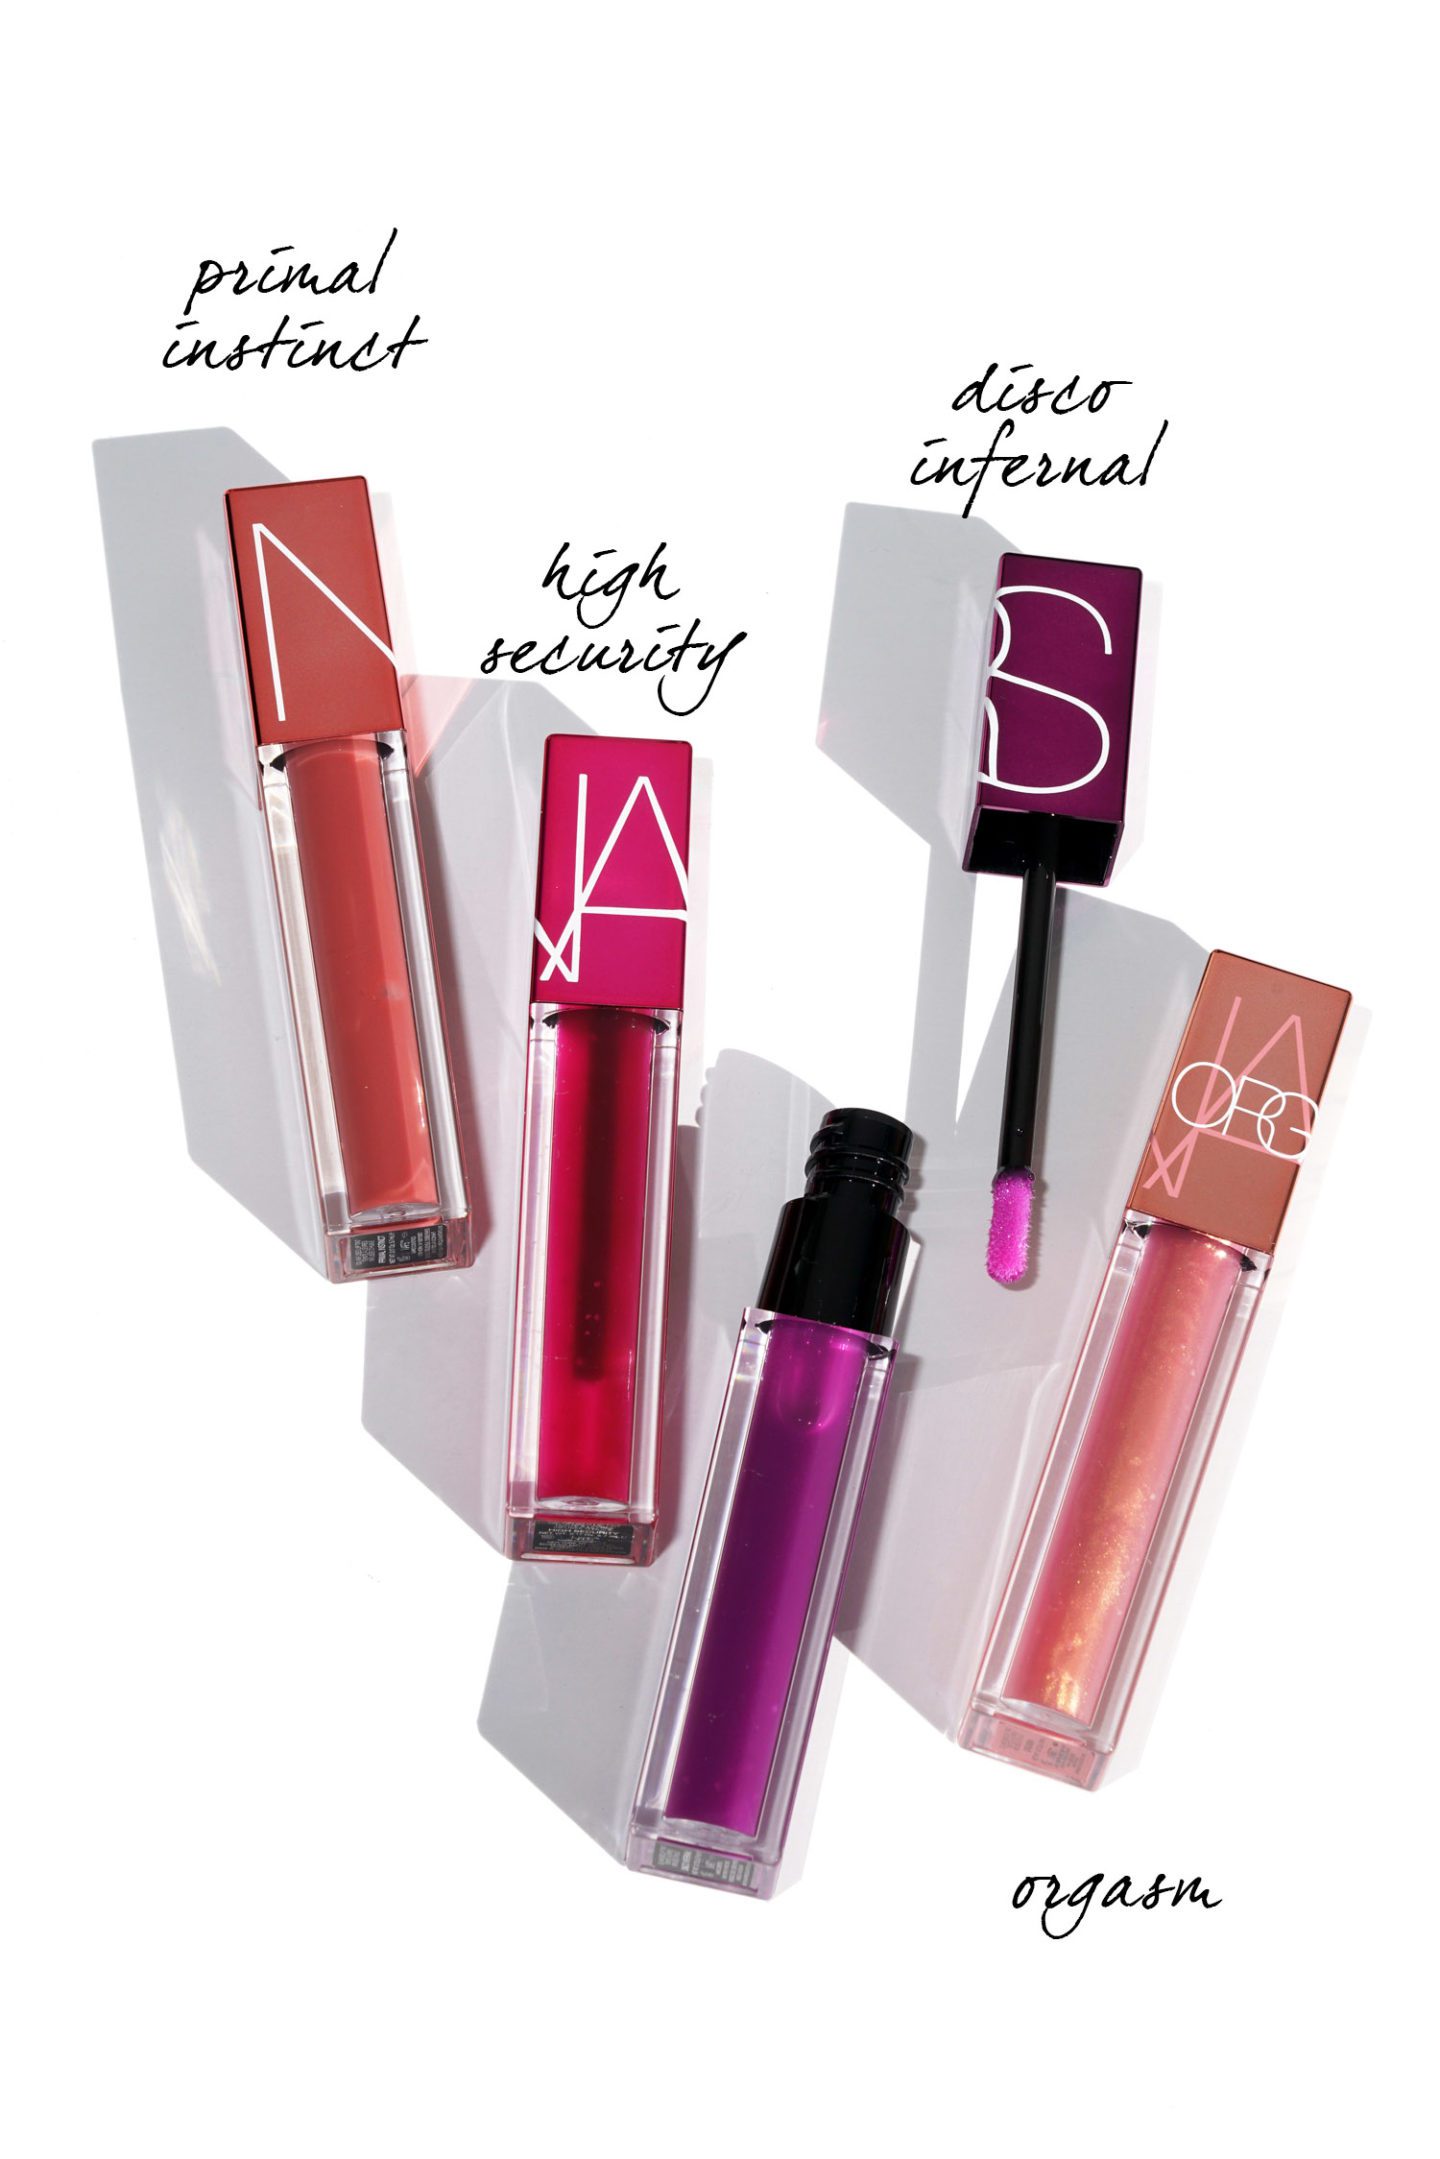 NARS Oil-Infused Lip Tints Primal Instinct, High Security, Disco Infernal review